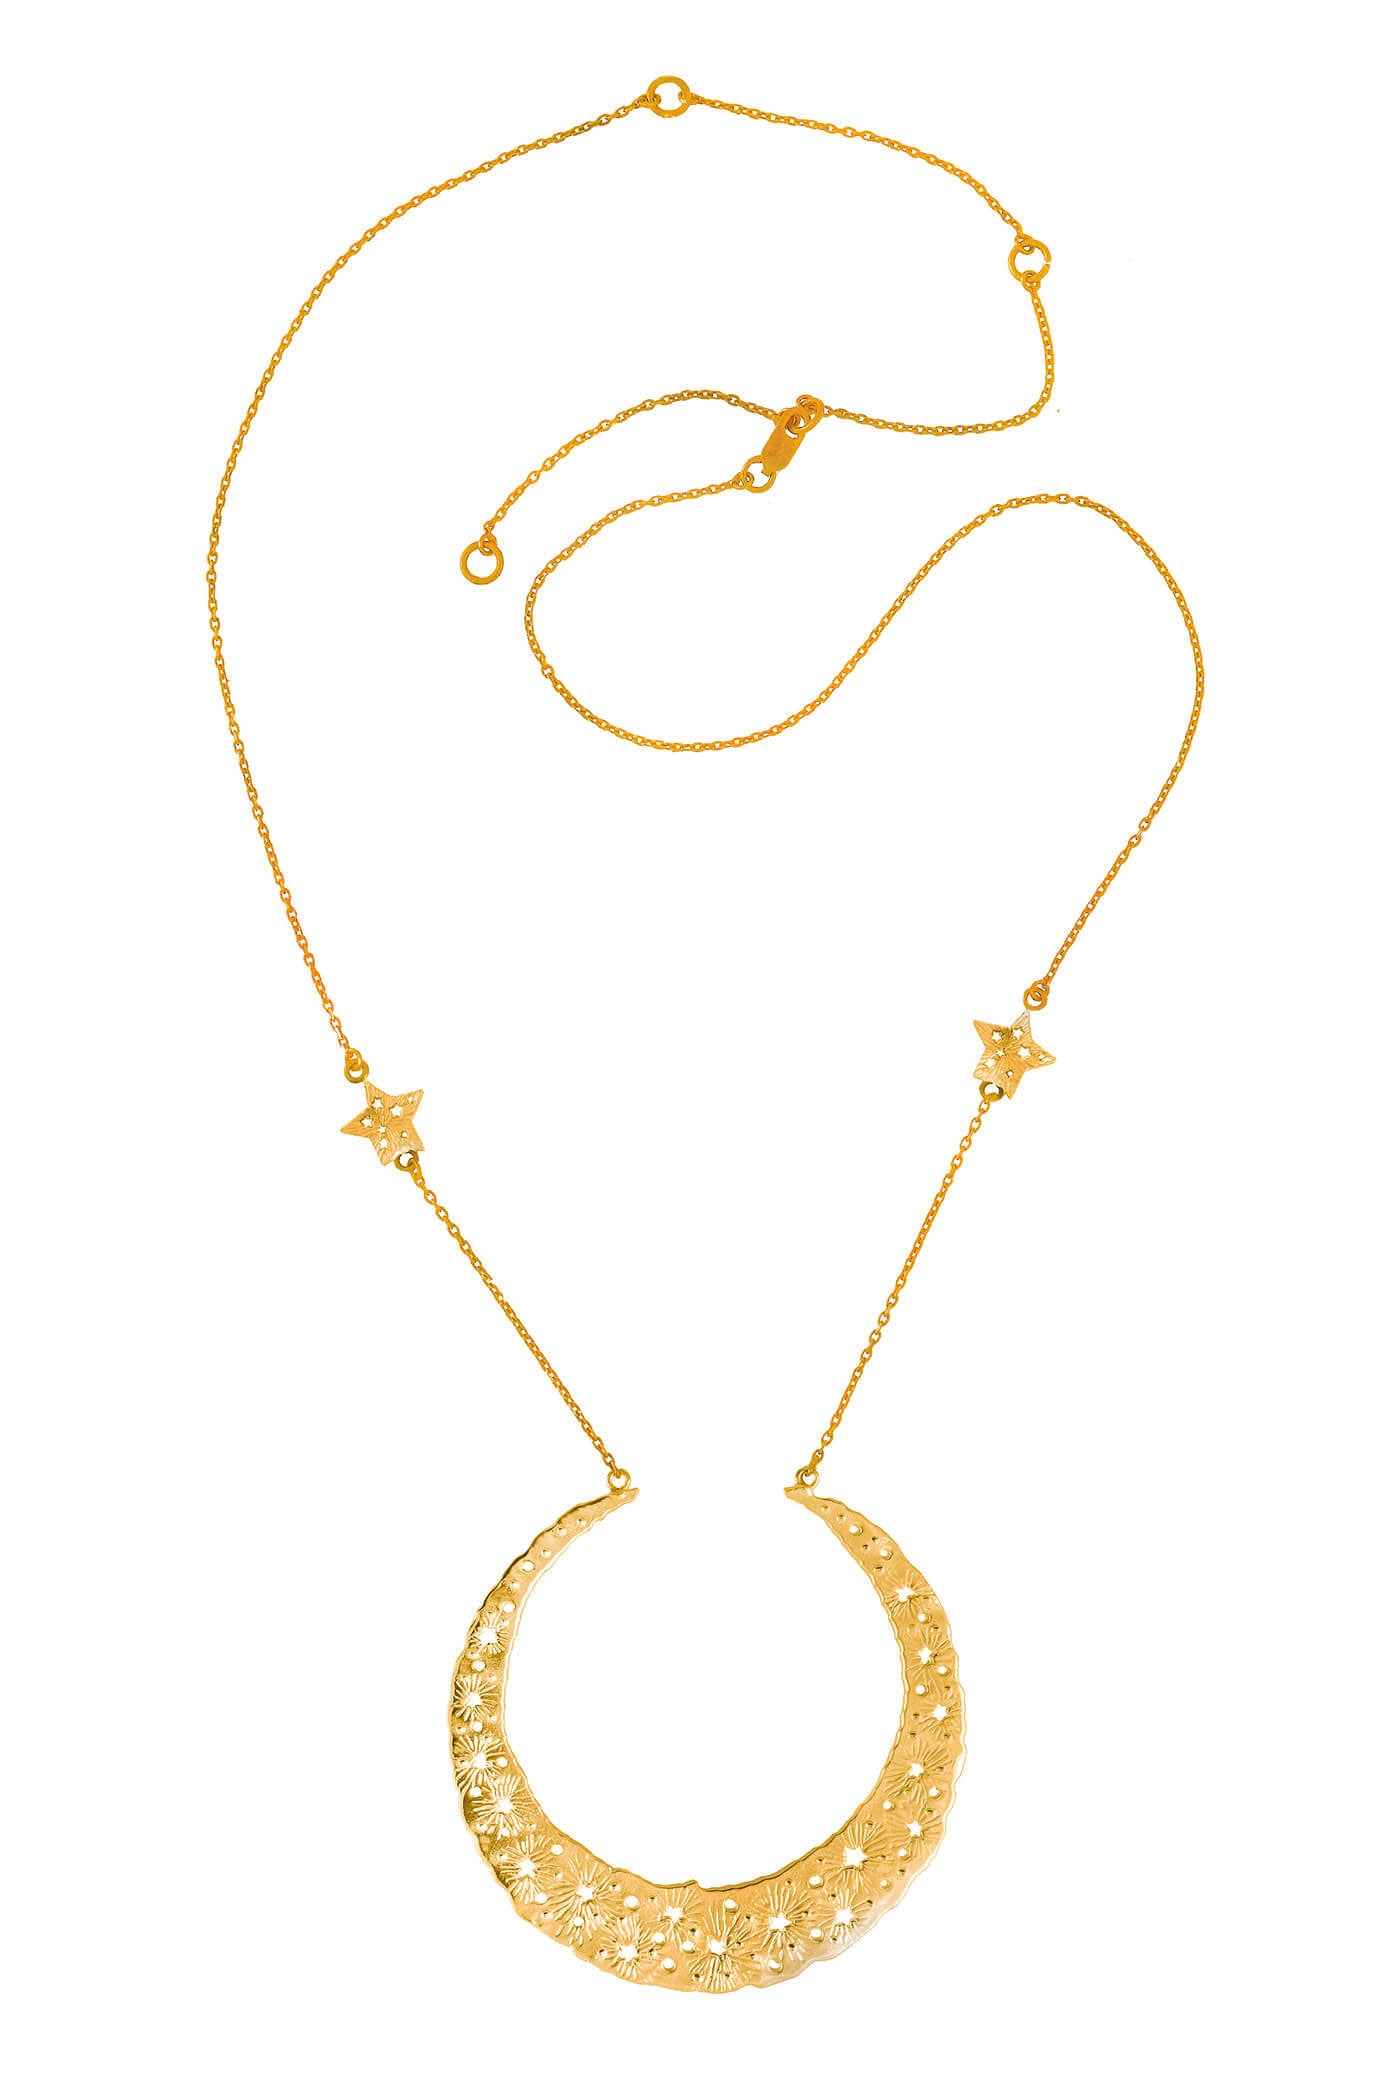 Moon Queen with 2 stars on the chain necklace. Silver, gold-plated